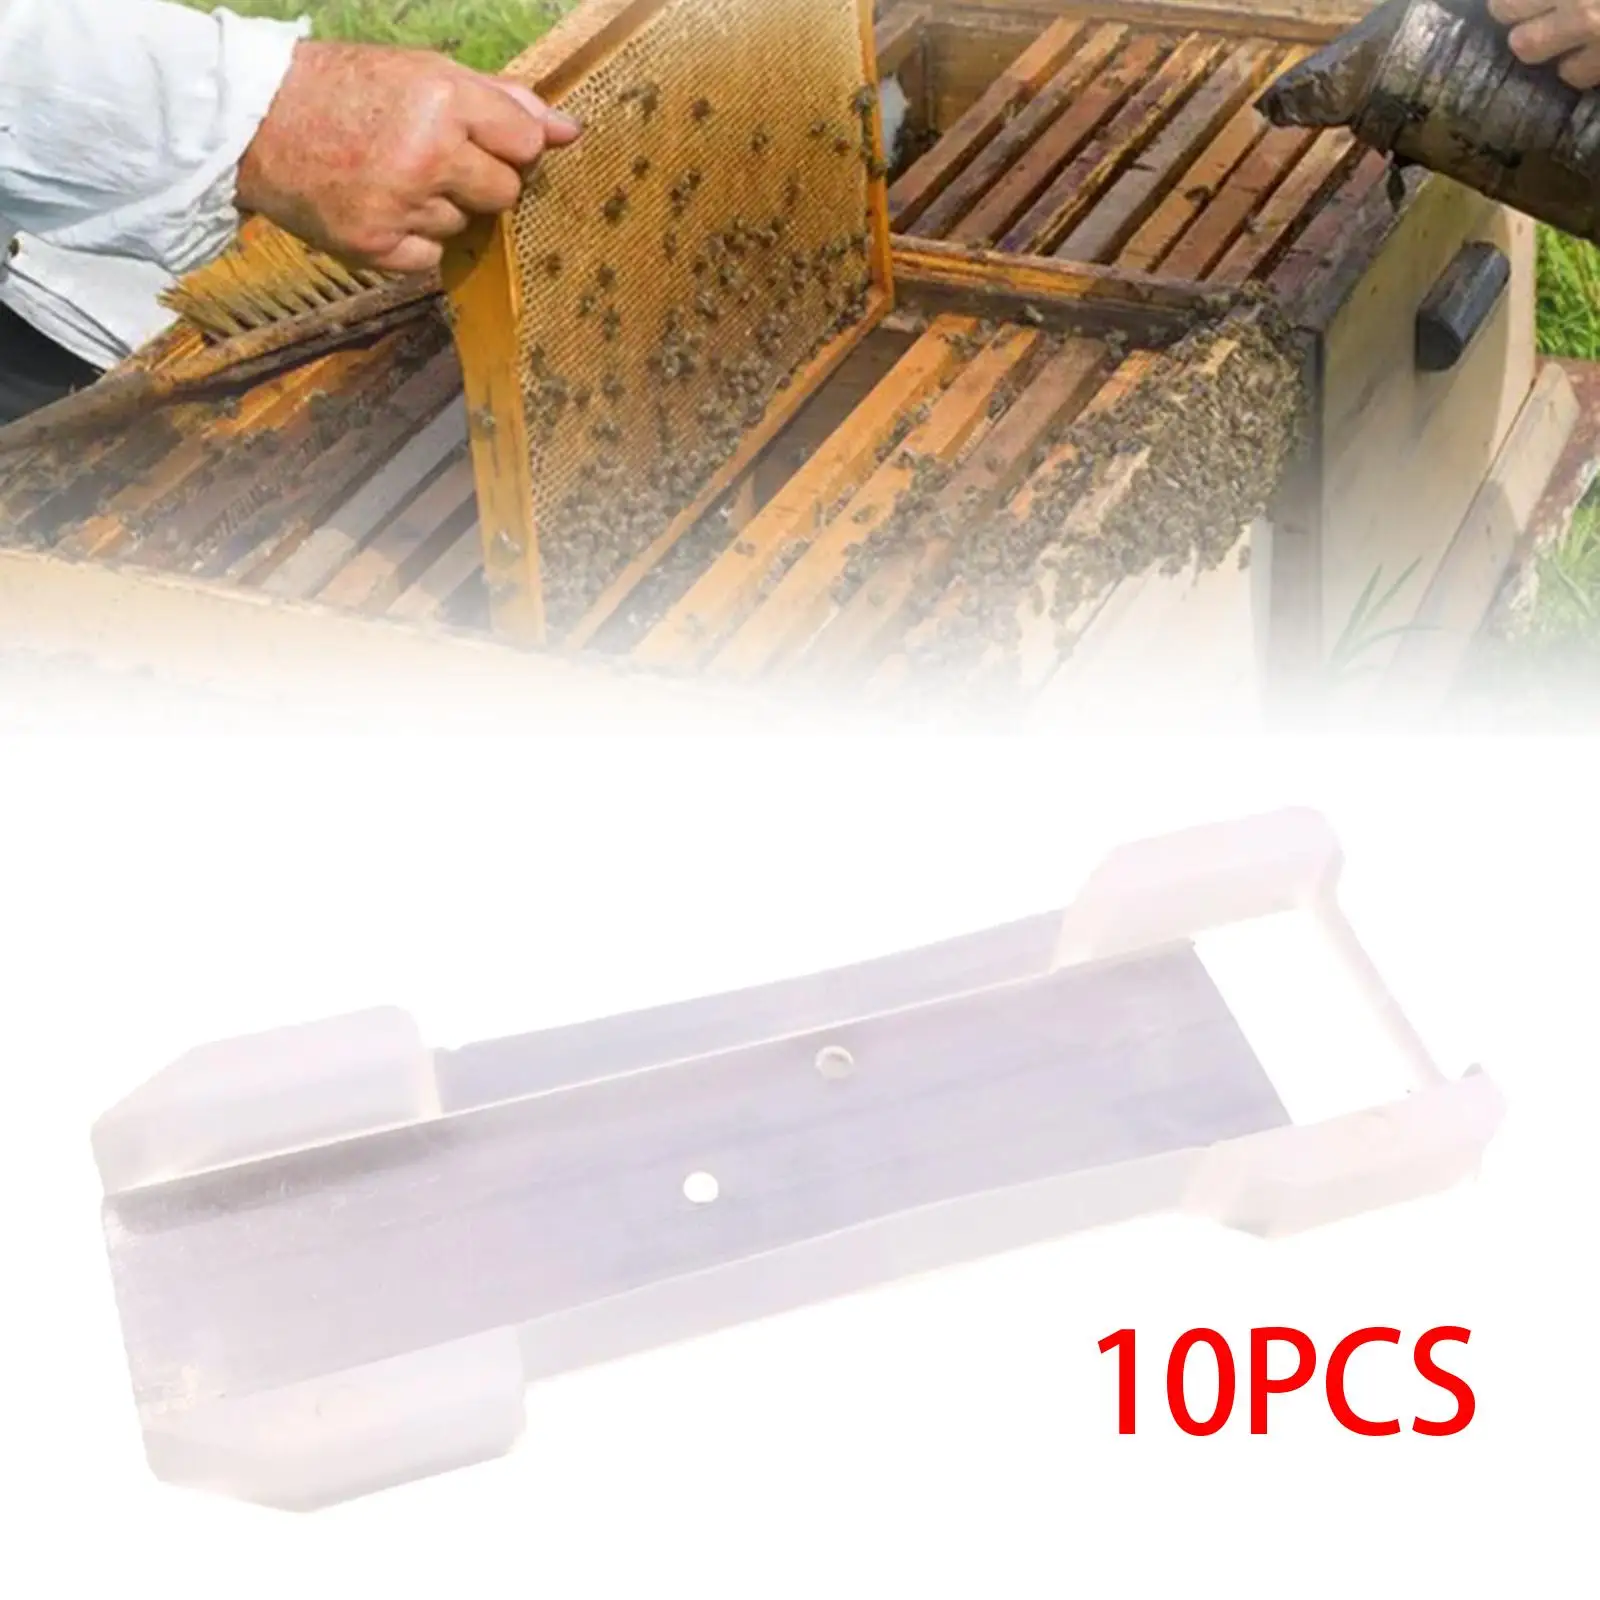 10 Pieces Plastic Beekeeping Hive Frame Crimper Nest Box Tight Yarn Wire Livestock Supplies Bee Hive Hand Tool Beekeeper Tool